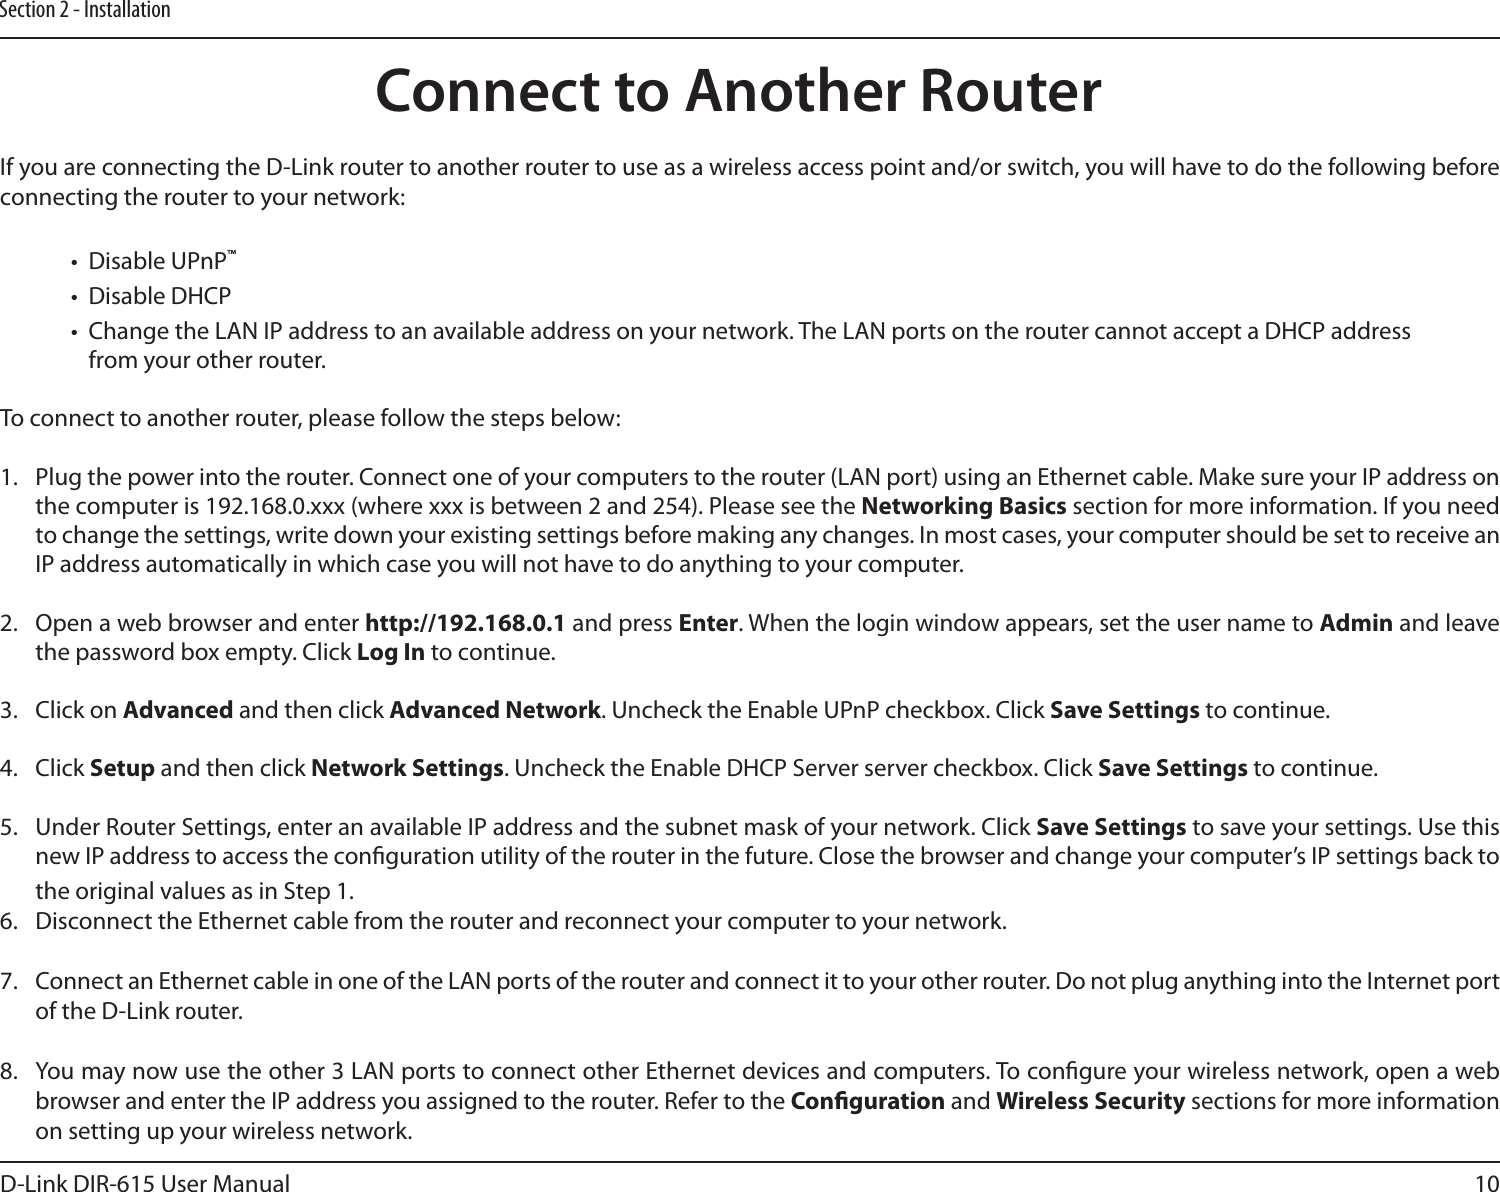 10D-Link DIR-615 User ManualSection 2 - InstallationIf you are connecting the D-Link router to another router to use as a wireless access point and/or switch, you will have to do the following before connecting the router to your network:•  Disable UPnP™•  Disable DHCP•  Change the LAN IP address to an available address on your network. The LAN ports on the router cannot accept a DHCP address from your other router.To connect to another router, please follow the steps below:1.  Plug the power into the router. Connect one of your computers to the router (LAN port) using an Ethernet cable. Make sure your IP address on the computer is 192.168.0.xxx (where xxx is between 2 and 254). Please see the Networking Basics section for more information. If you need to change the settings, write down your existing settings before making any changes. In most cases, your computer should be set to receive an IP address automatically in which case you will not have to do anything to your computer.2.  Open a web browser and enter http://192.168.0.1 and press Enter. When the login window appears, set the user name to Admin and leave the password box empty. Click Log In to continue.3.  Click on Advanced and then click Advanced Network. Uncheck the Enable UPnP checkbox. Click Save Settings to continue. 4.  Click Setup and then click Network Settings. Uncheck the Enable DHCP Server server checkbox. Click Save Settings to continue.5.  Under Router Settings, enter an available IP address and the subnet mask of your network. Click Save Settings to save your settings. Use this new IP address to access the conguration utility of the router in the future. Close the browser and change your computer’s IP settings back to the original values as in Step 1.6.  Disconnect the Ethernet cable from the router and reconnect your computer to your network. 7.  Connect an Ethernet cable in one of the LAN ports of the router and connect it to your other router. Do not plug anything into the Internet port of the D-Link router. 8.  You may now use the other 3 LAN ports to connect other Ethernet devices and computers. To congure your wireless network, open a web browser and enter the IP address you assigned to the router. Refer to the Conguration and Wireless Security sections for more information on setting up your wireless network.Connect to Another Router